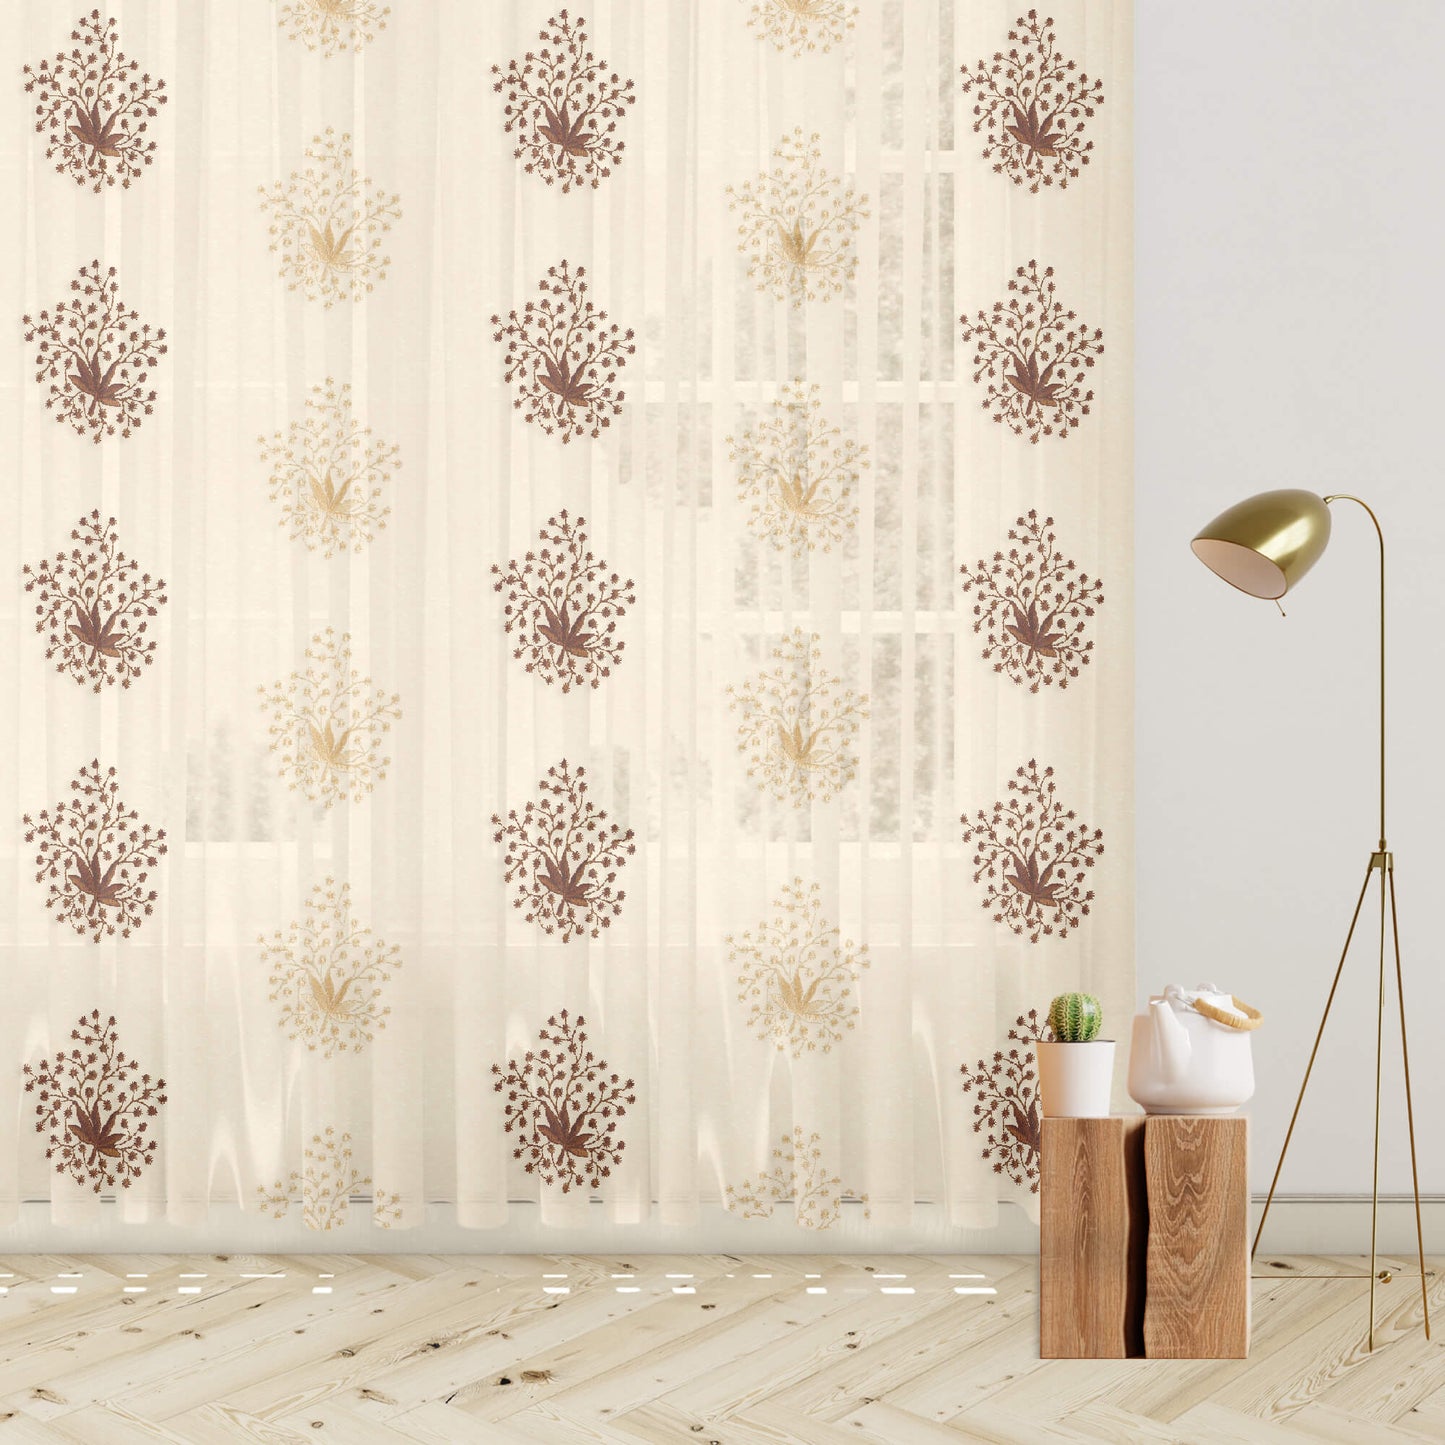 Oatmeal Beige And Coffee Brown Floral Pattern Embroidery Organza Tissue Premium Sheer Fabric (Width 48 Inches)